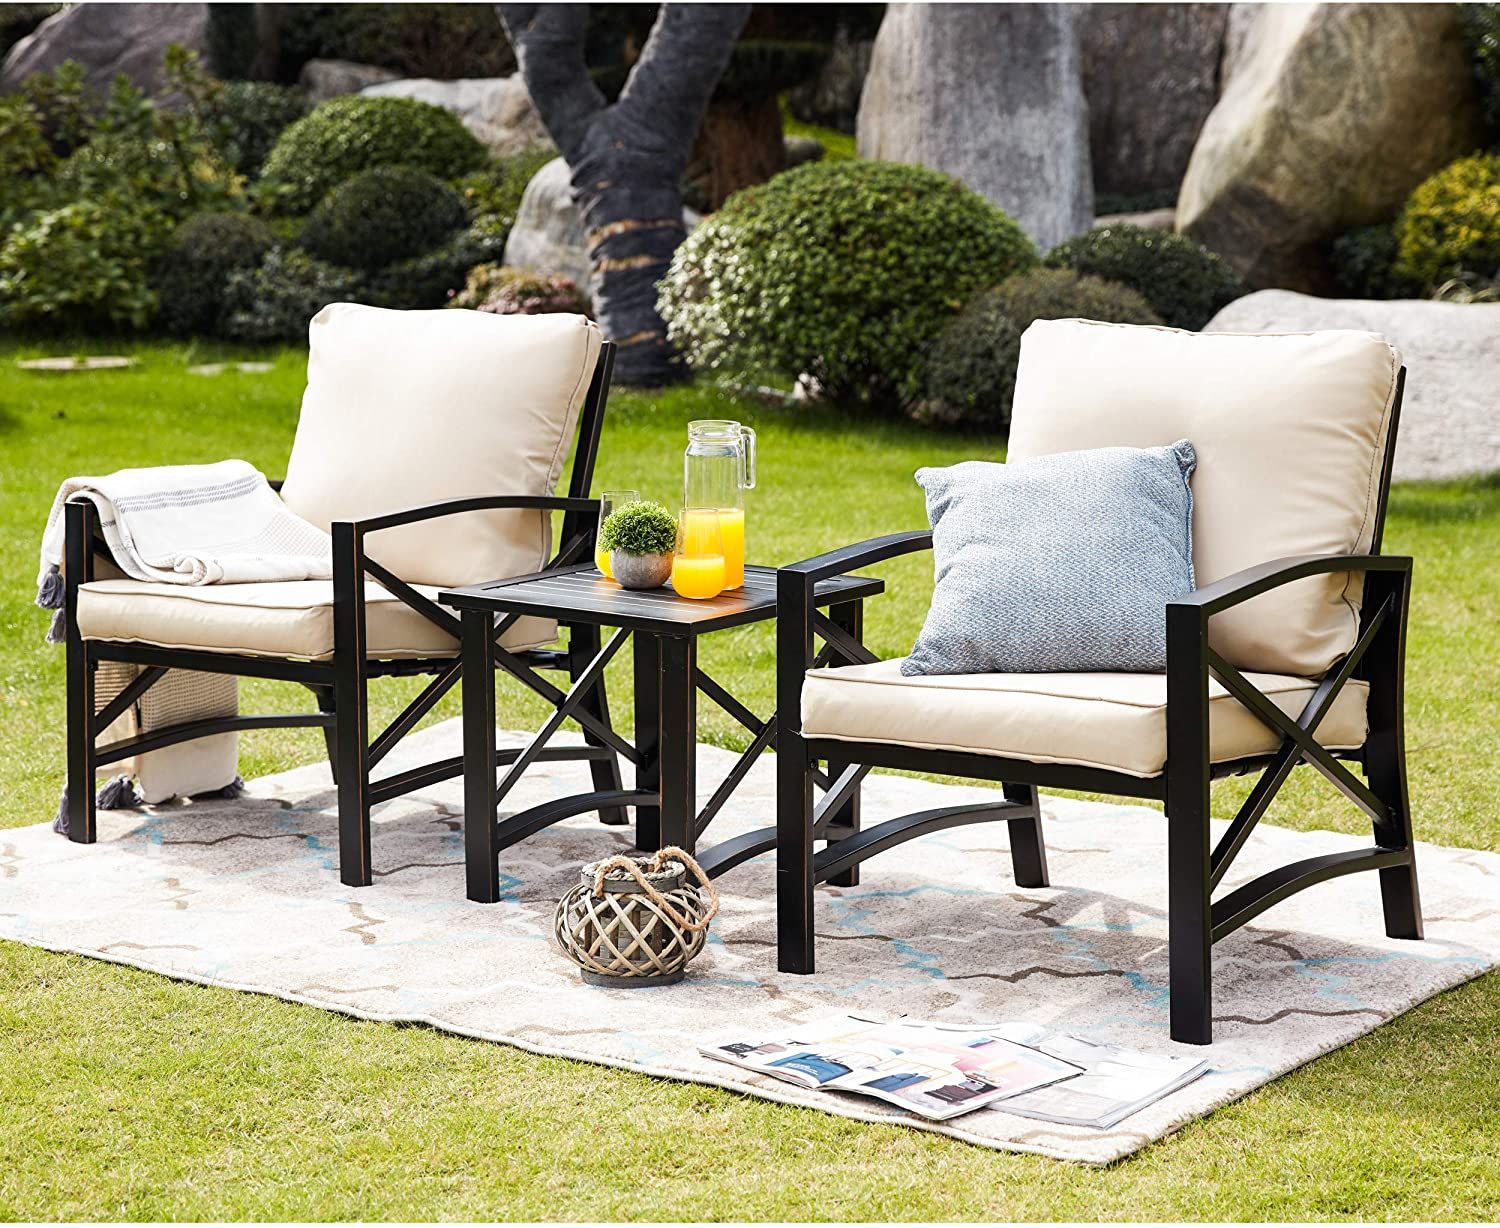 How You Can Comfortably Enjoy The 2021 Summer Season Outdoors With A Patio